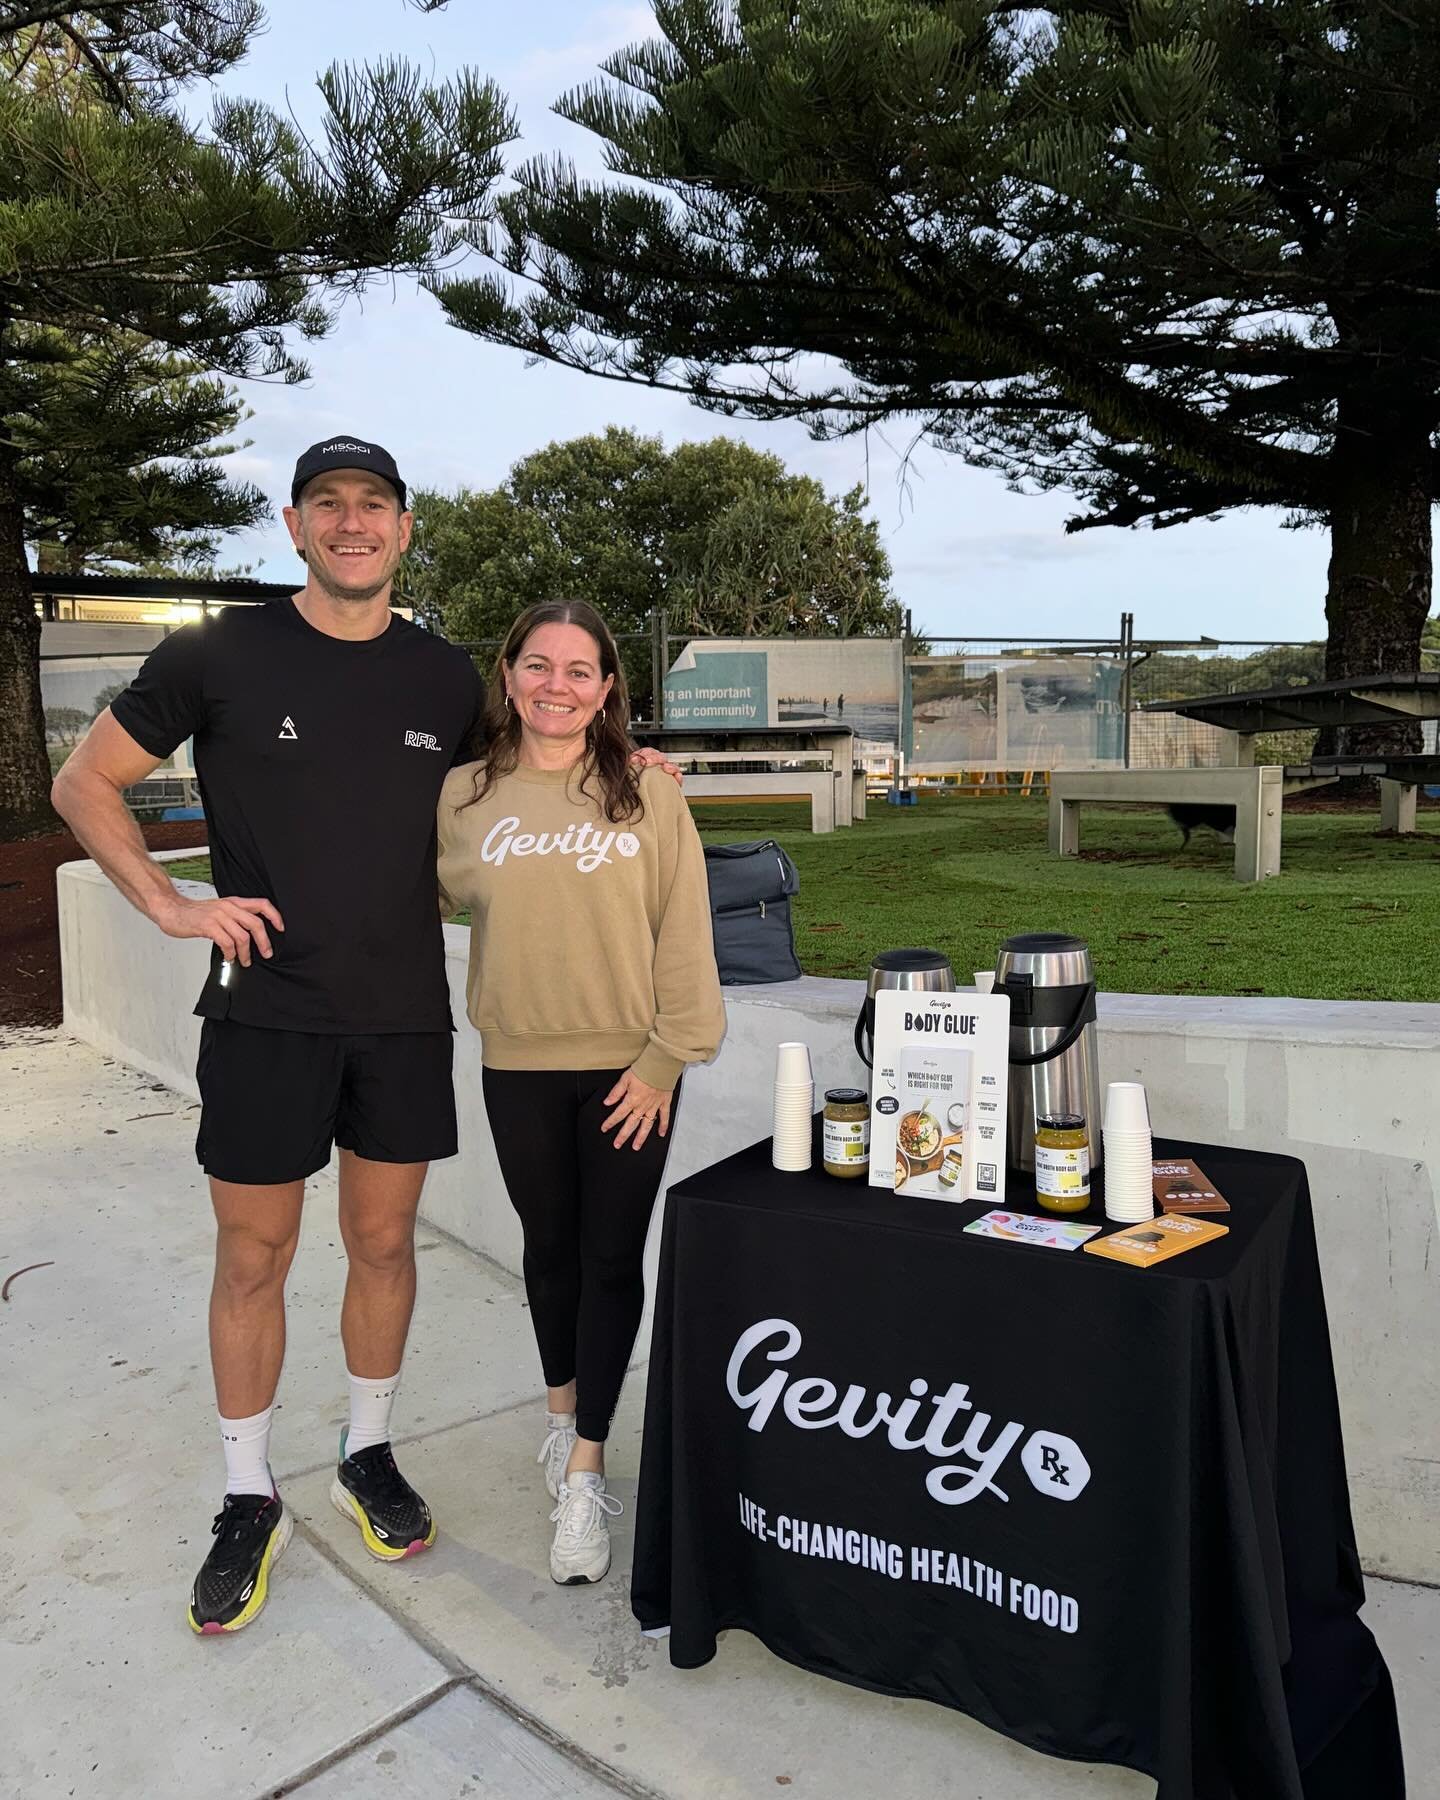 Had some special visitors at our Tuesday morning GC run 🏃🏻&zwj;♂️

Alisha from @gevityrx come and had a little chat about their amazing products and the health benefits! Also providing some samples for the runners to try post run. It&rsquo;s always